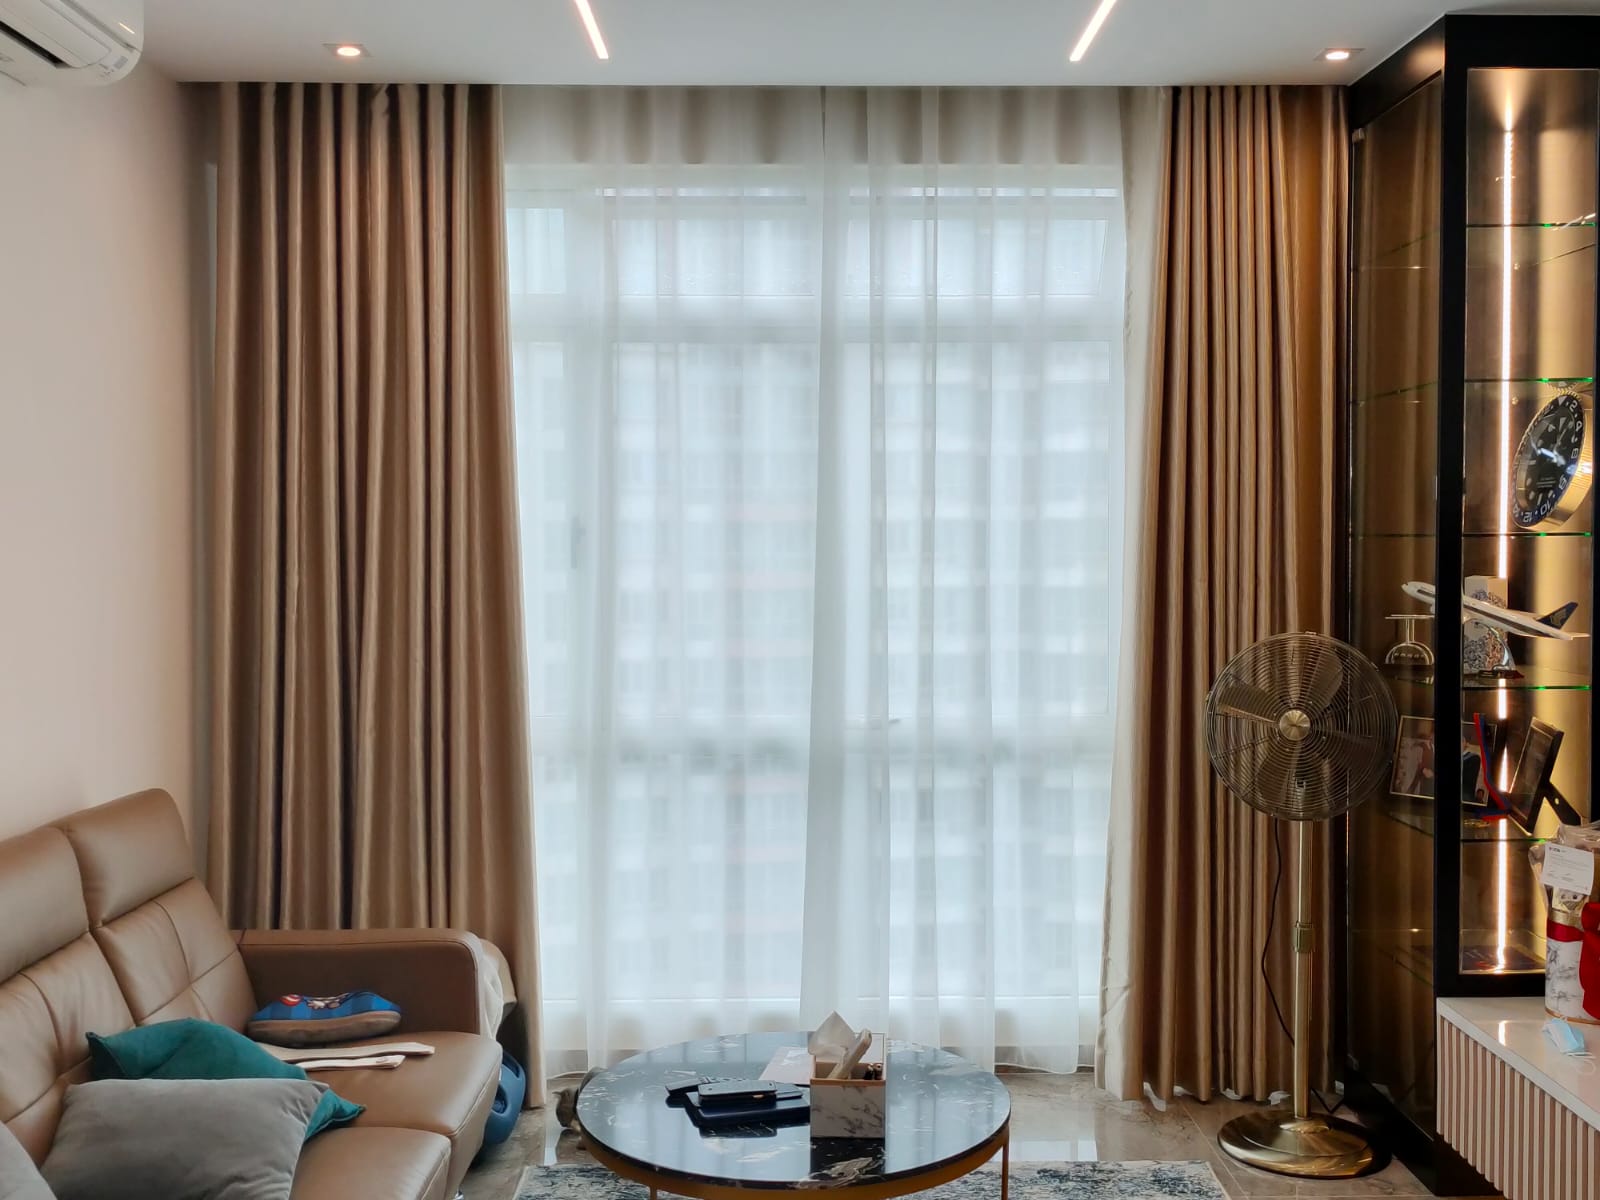 This is a Picture of Day and night curtain picture  for Singapore condo, living hall, day and night curtain, 25 Rose wood drive